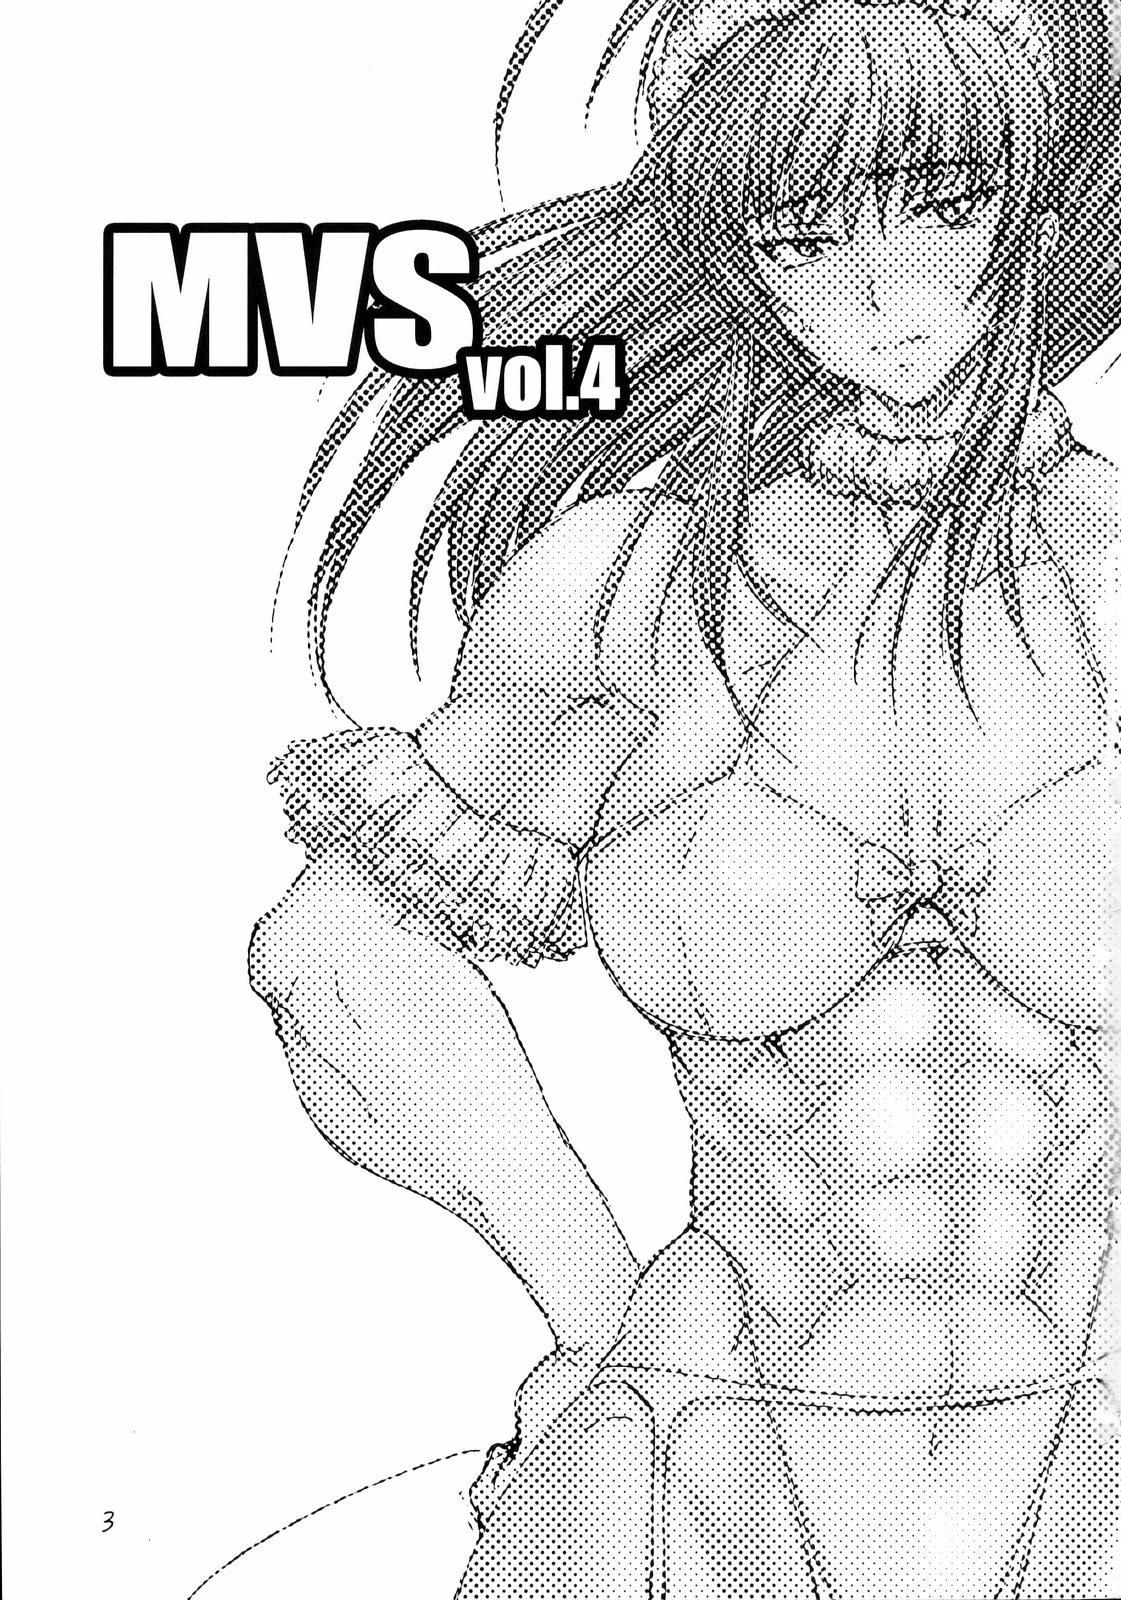 Verified Profile MVS vol.4 - King of fighters Hot Milf - Page 2